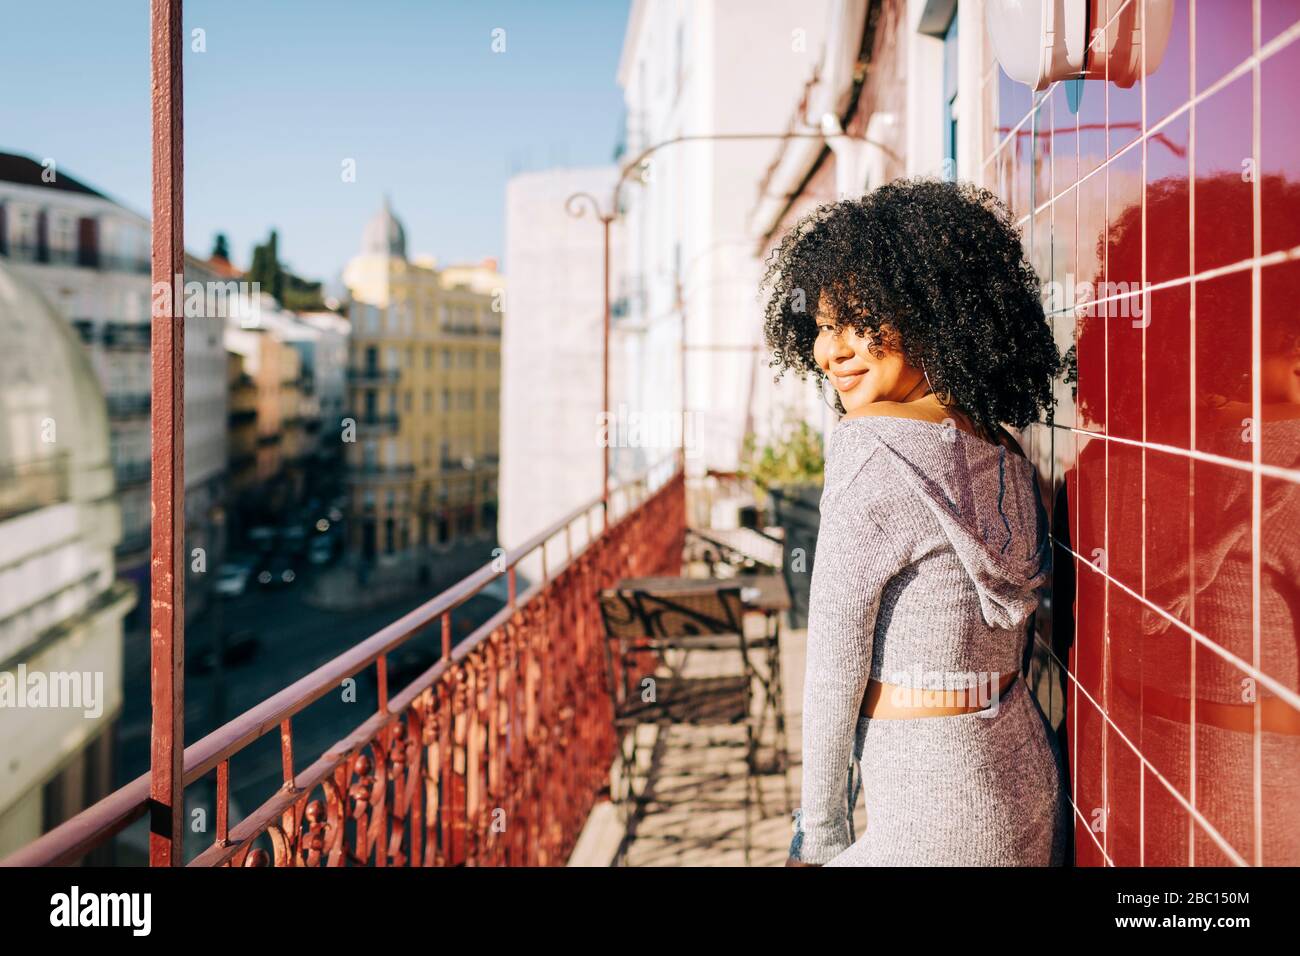 Portrait of young woman with curly hair on balcony Stock Photo